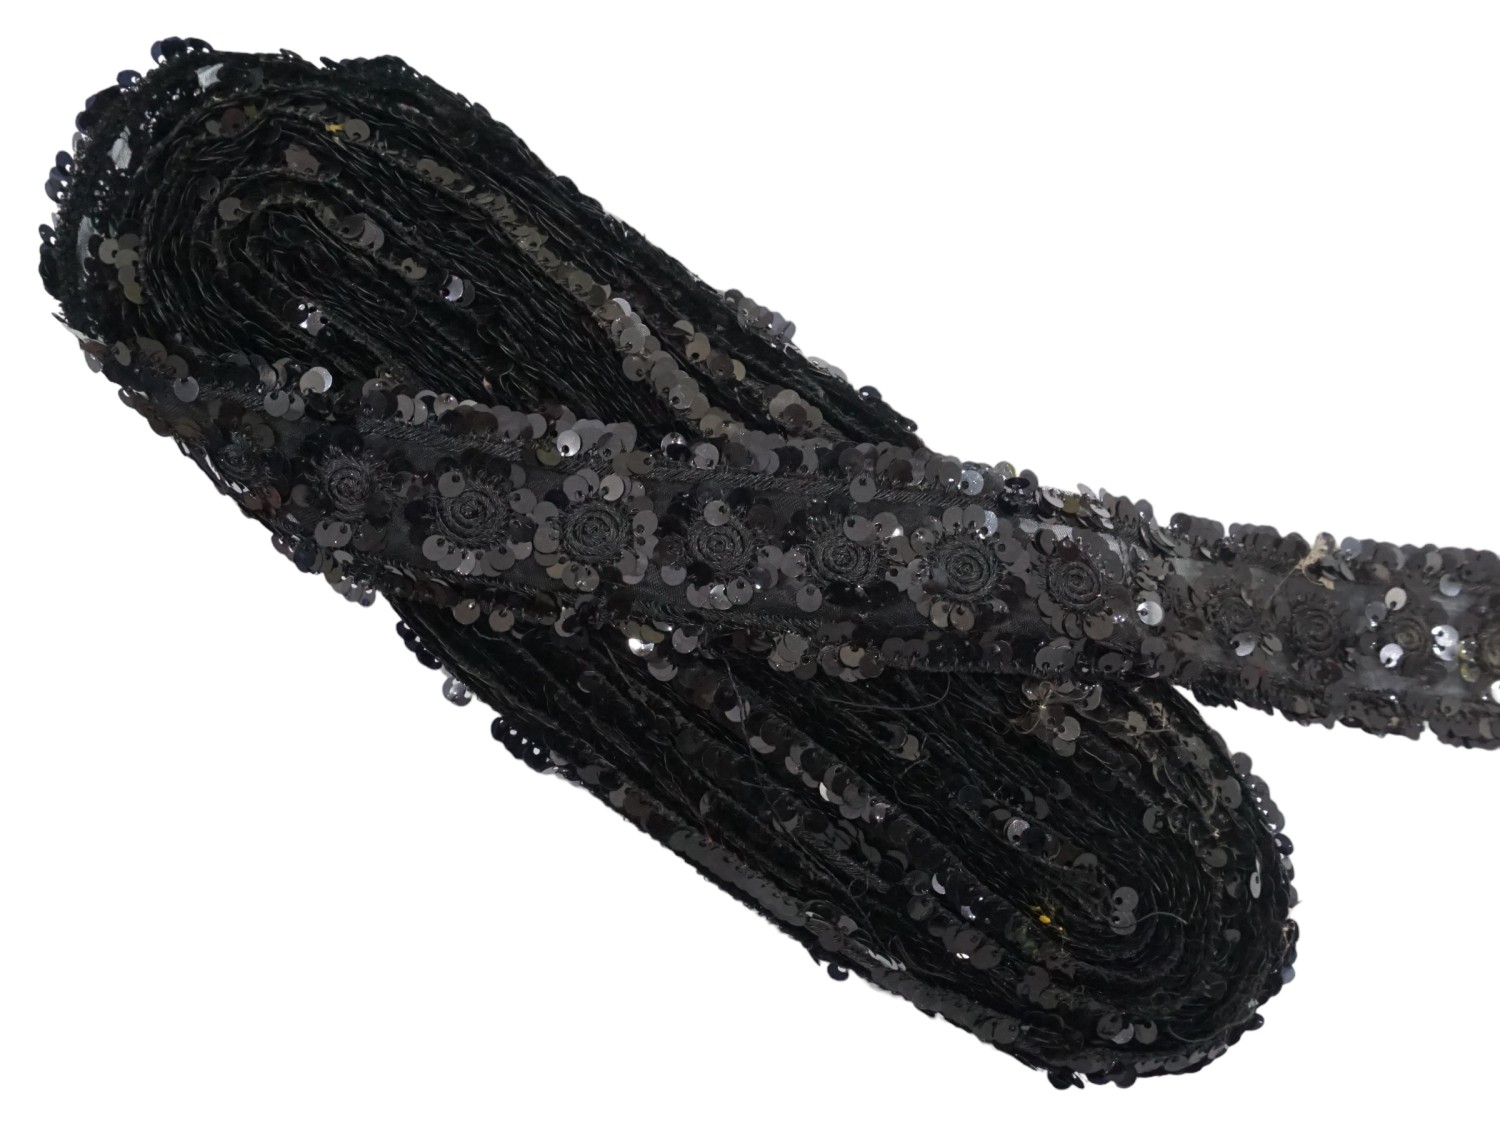 black lace online, Buy black lace online in india